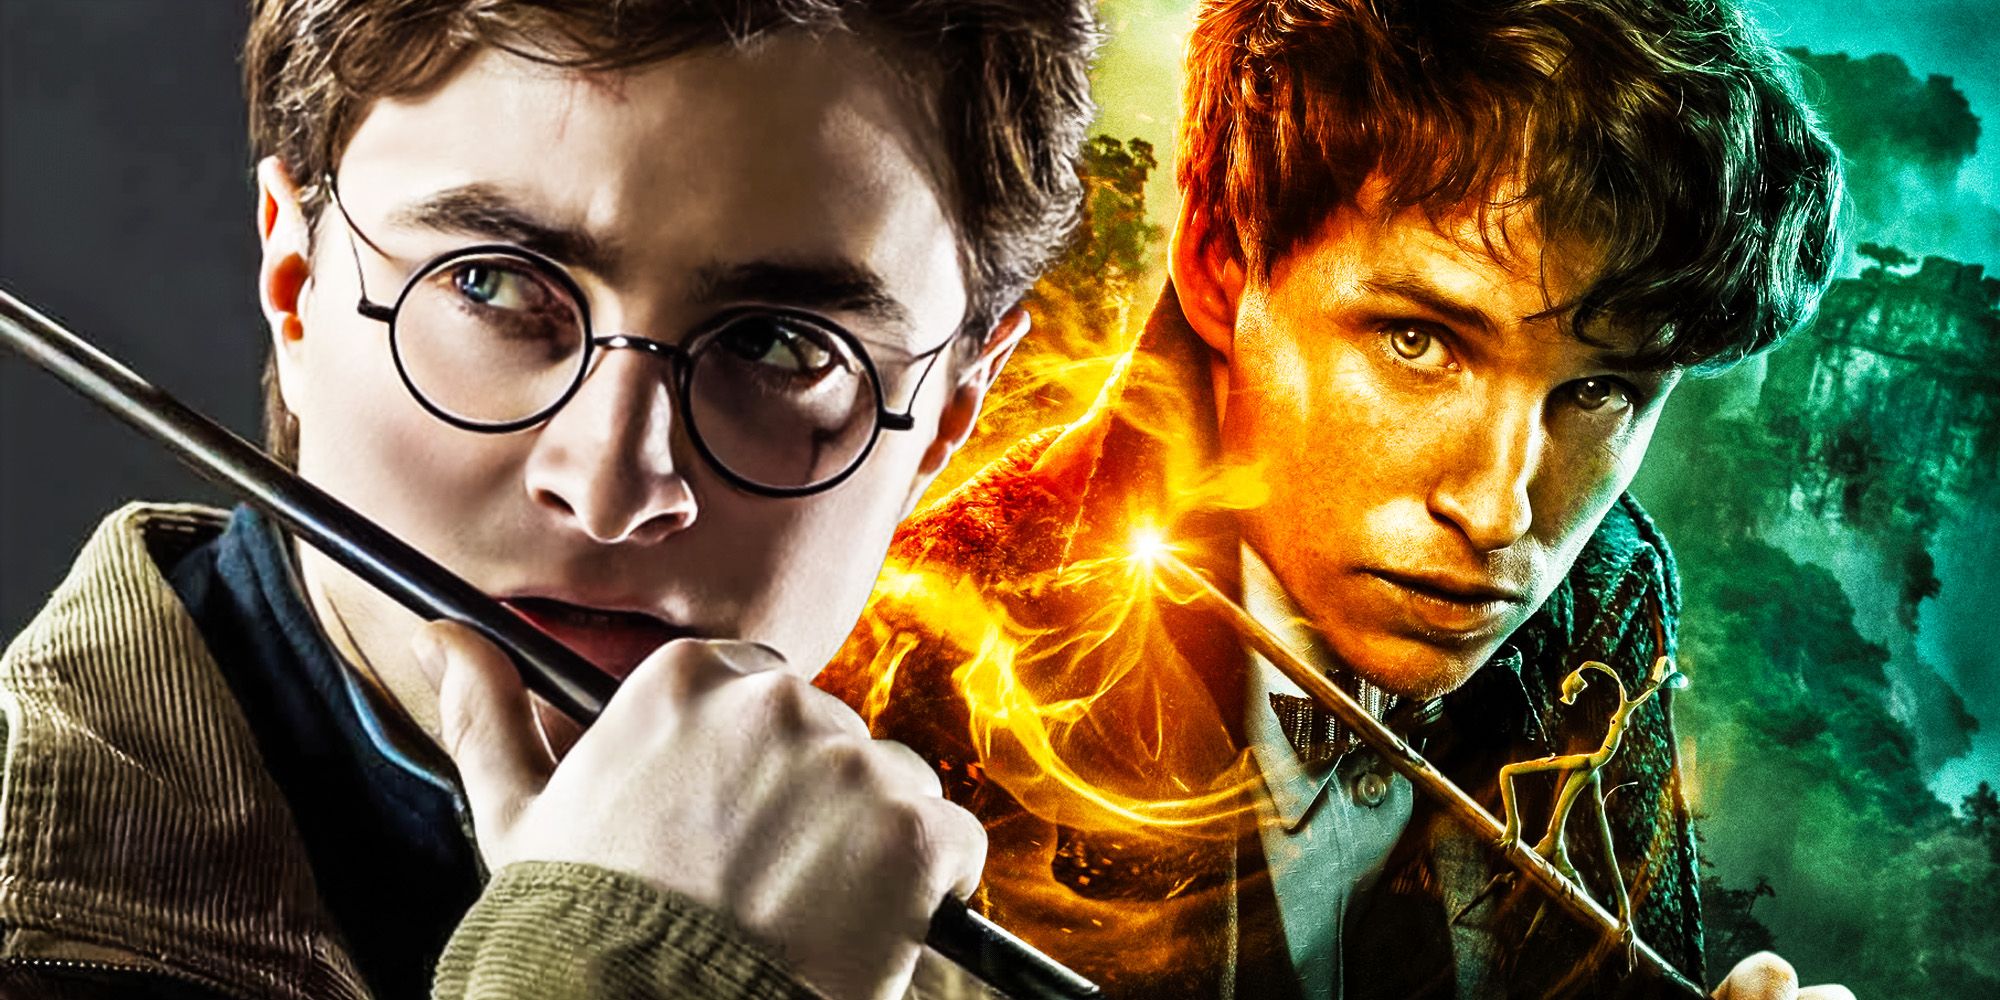 The Subsequent Harry Potter Film Has To Break An Outdated Wizarding World Development